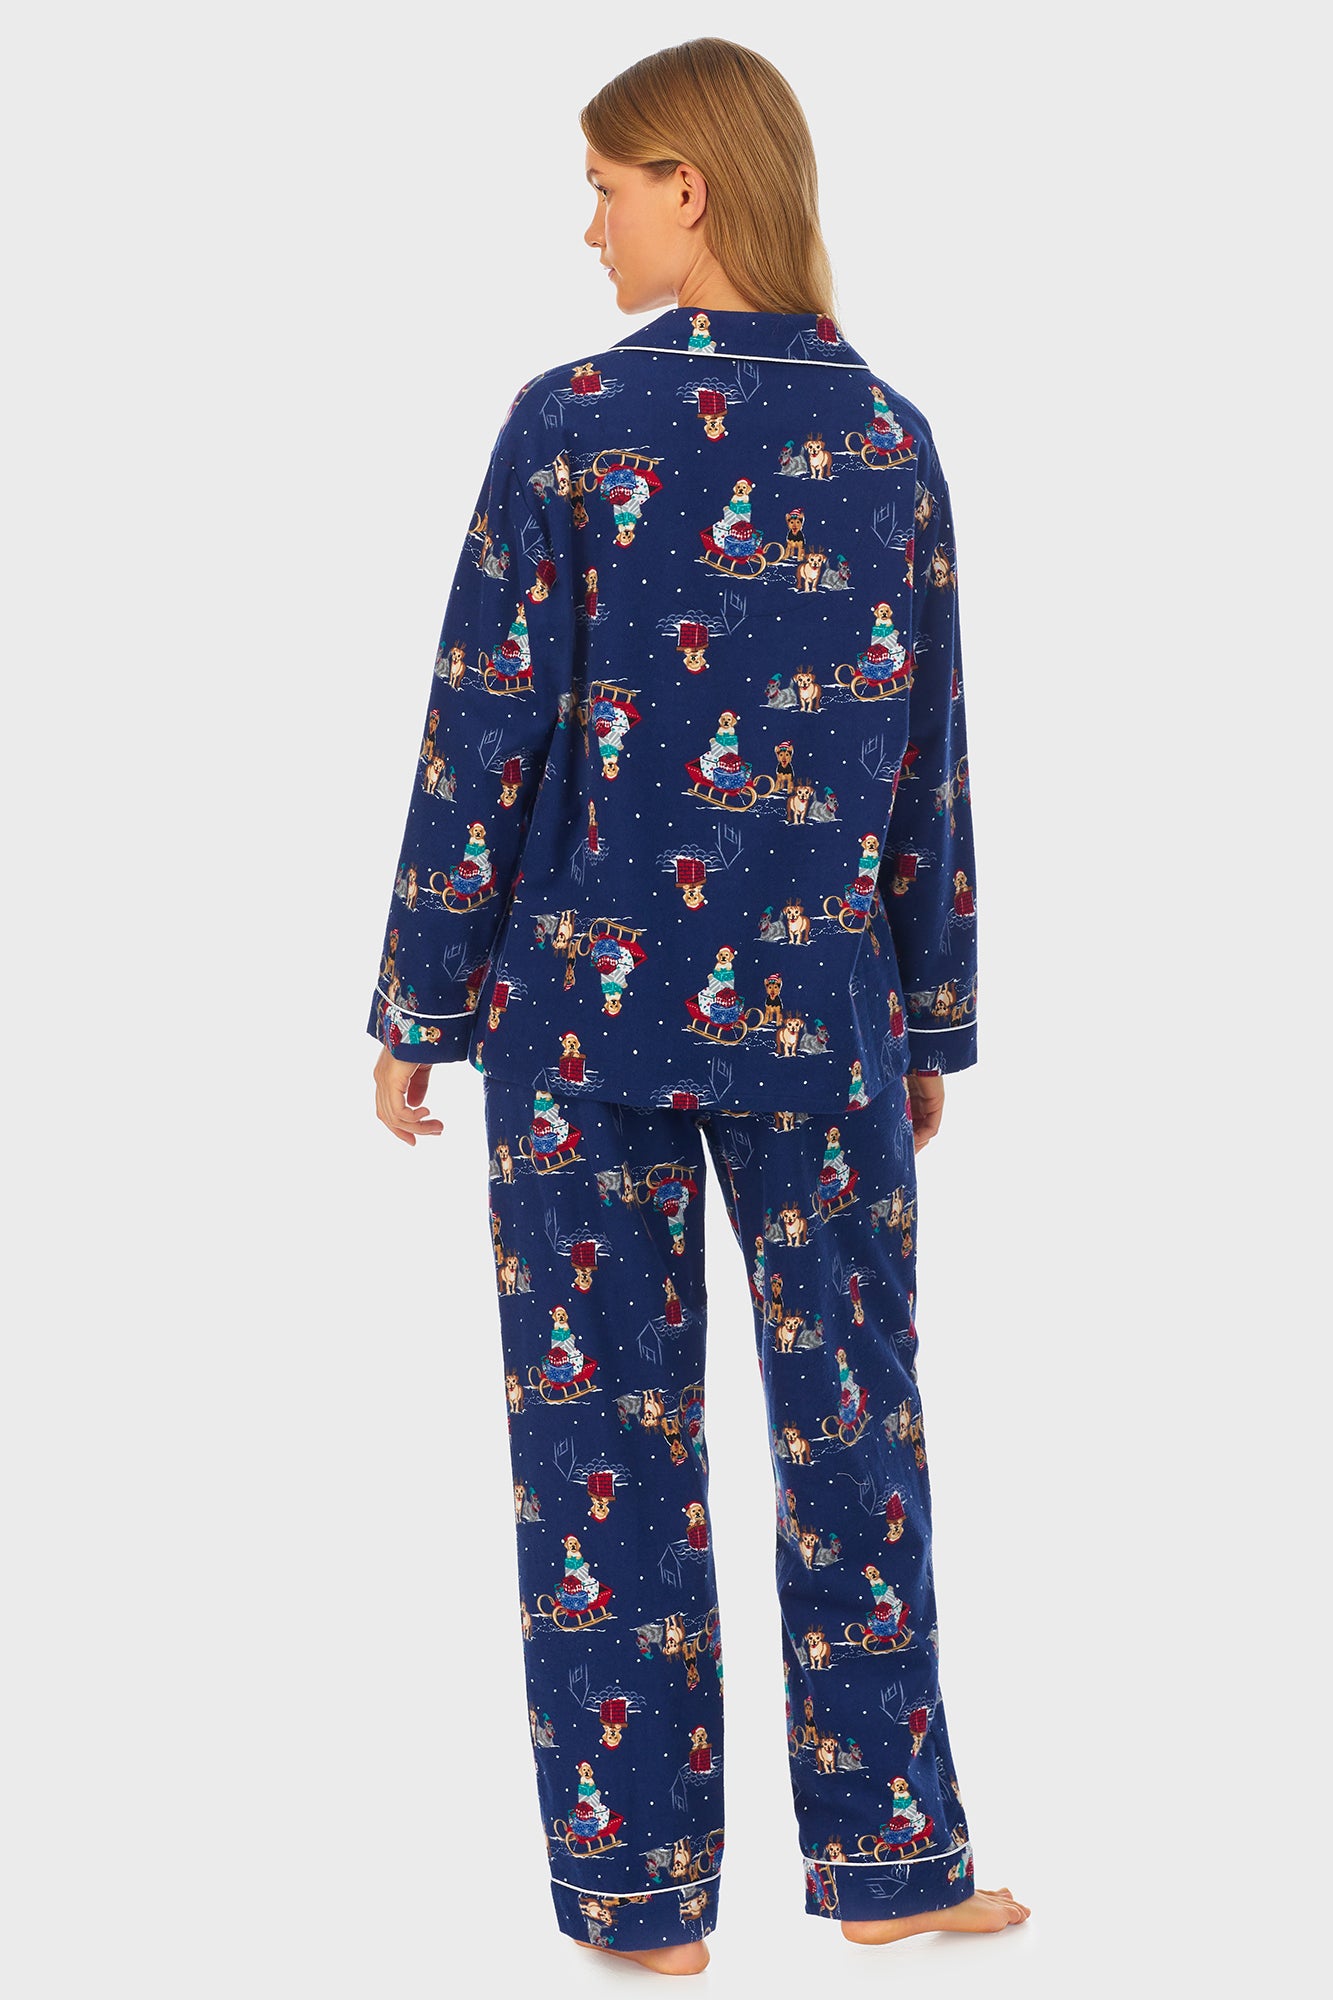 A lady wearing navy long sleeve women's pajama with sleigh puppies print.